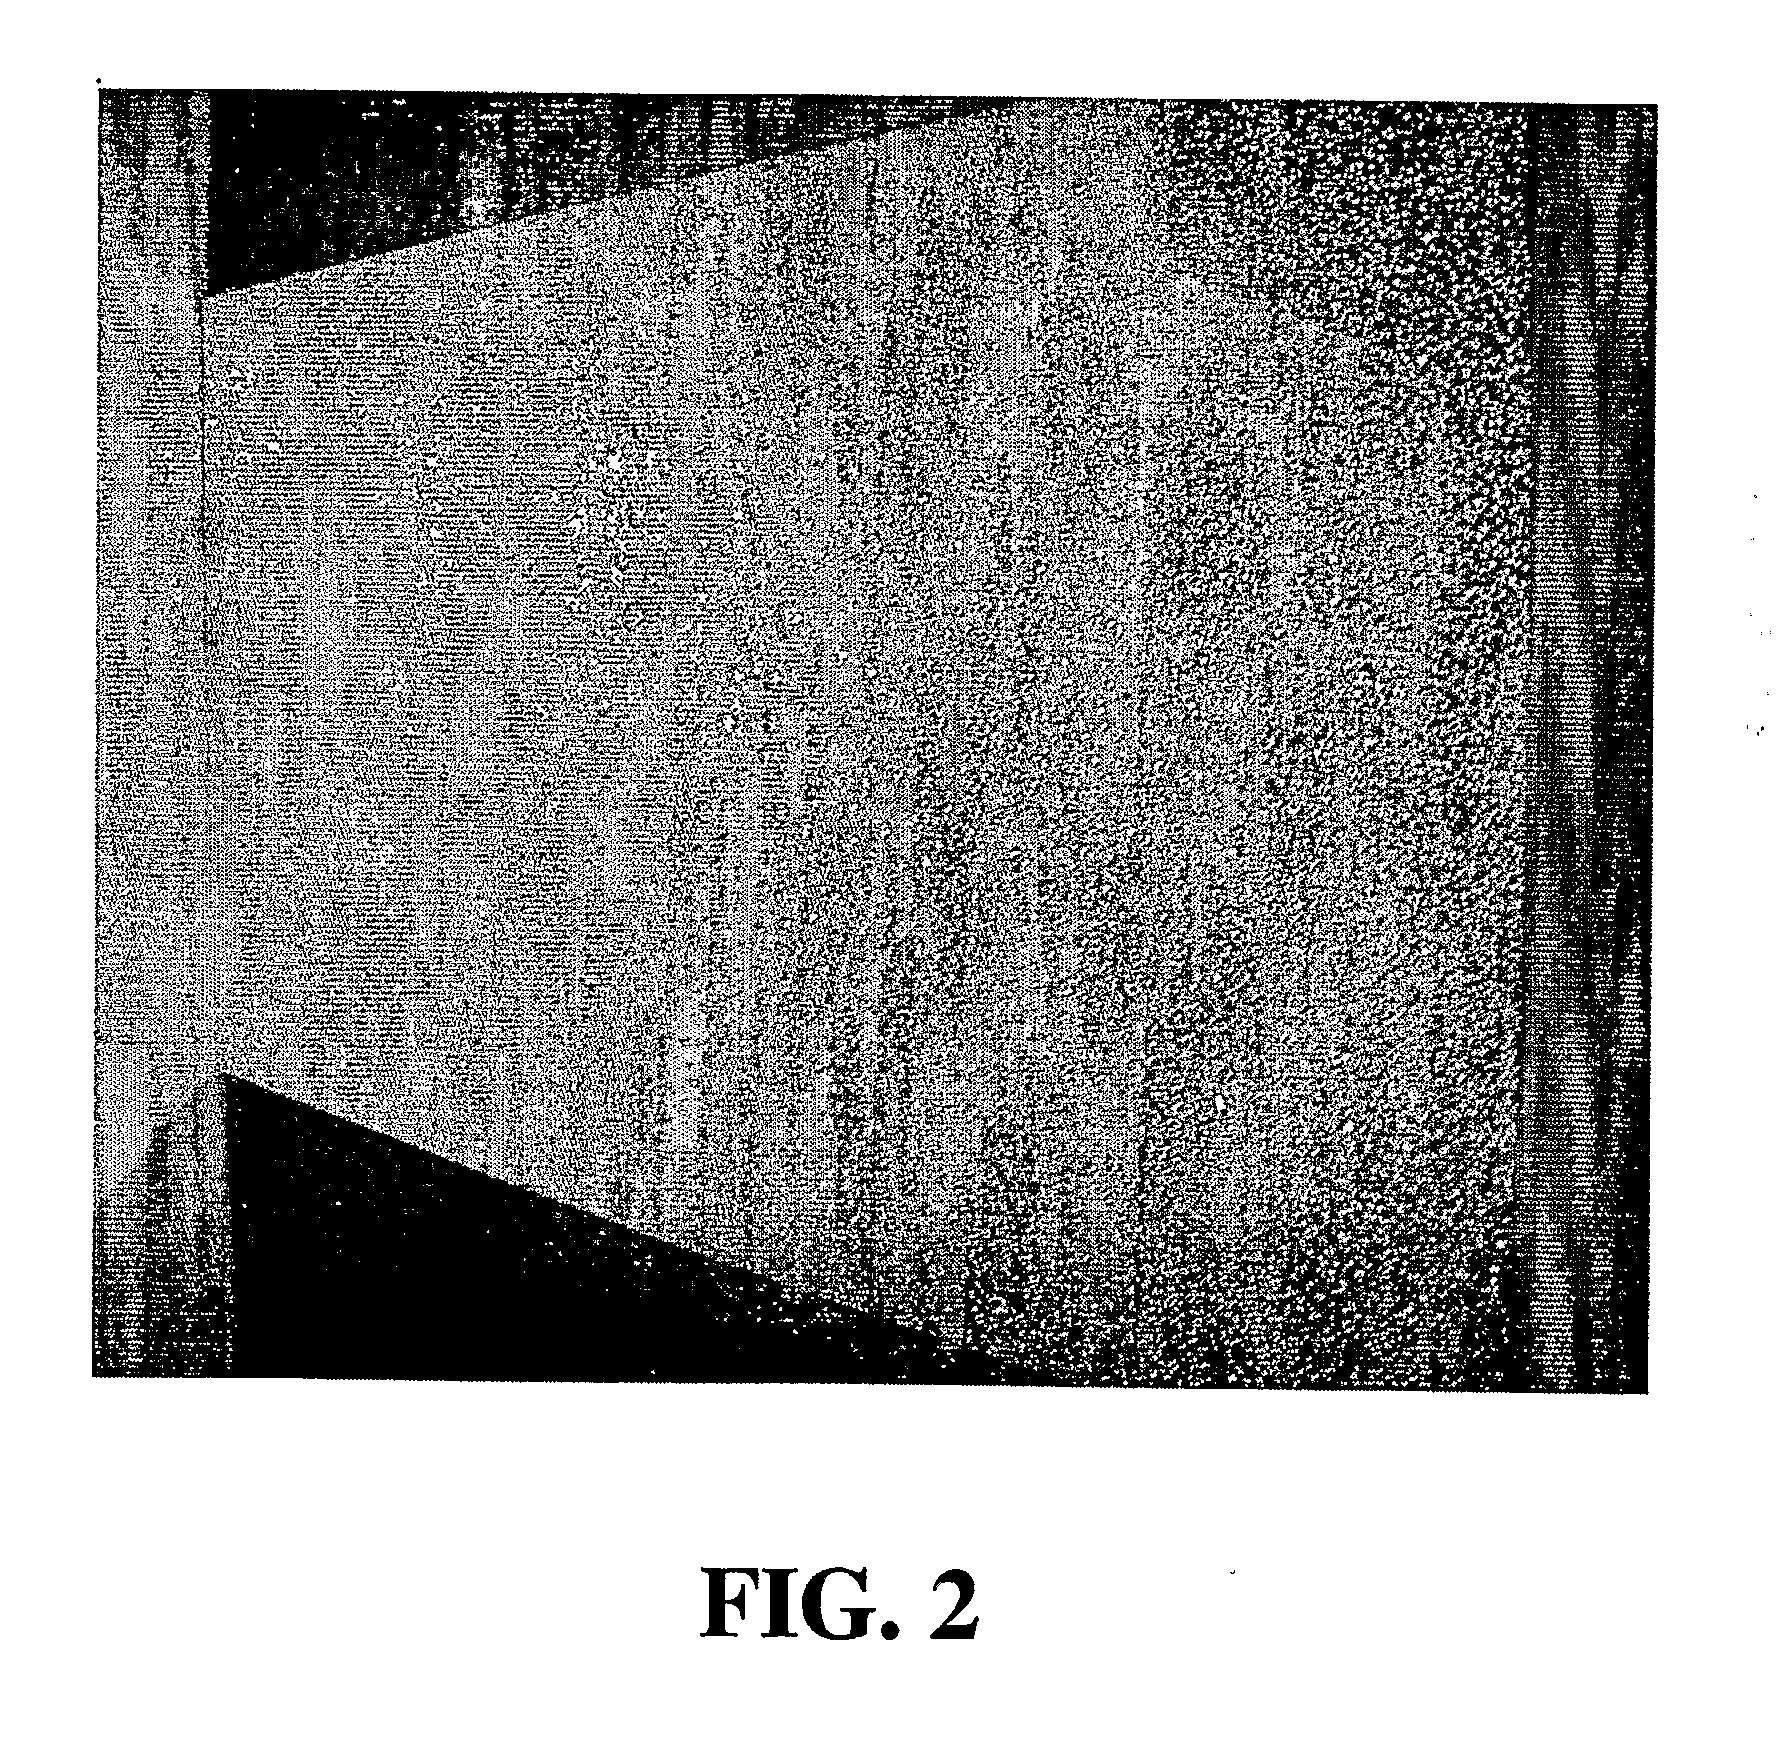 Articles having improved corrosion resistance